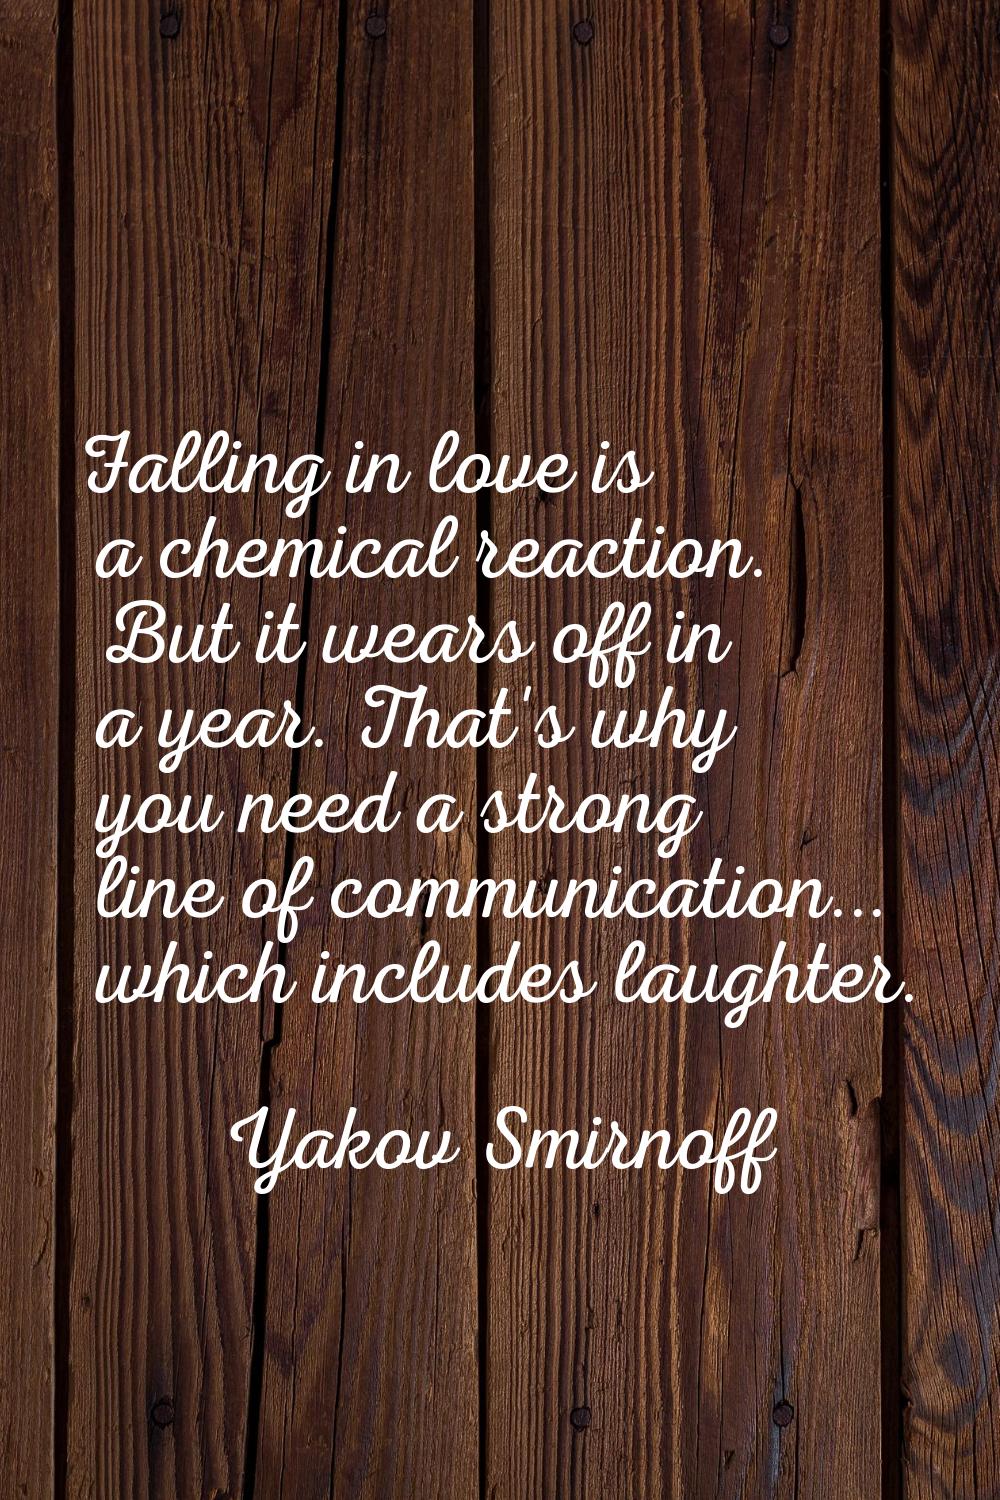 Falling in love is a chemical reaction. But it wears off in a year. That's why you need a strong li